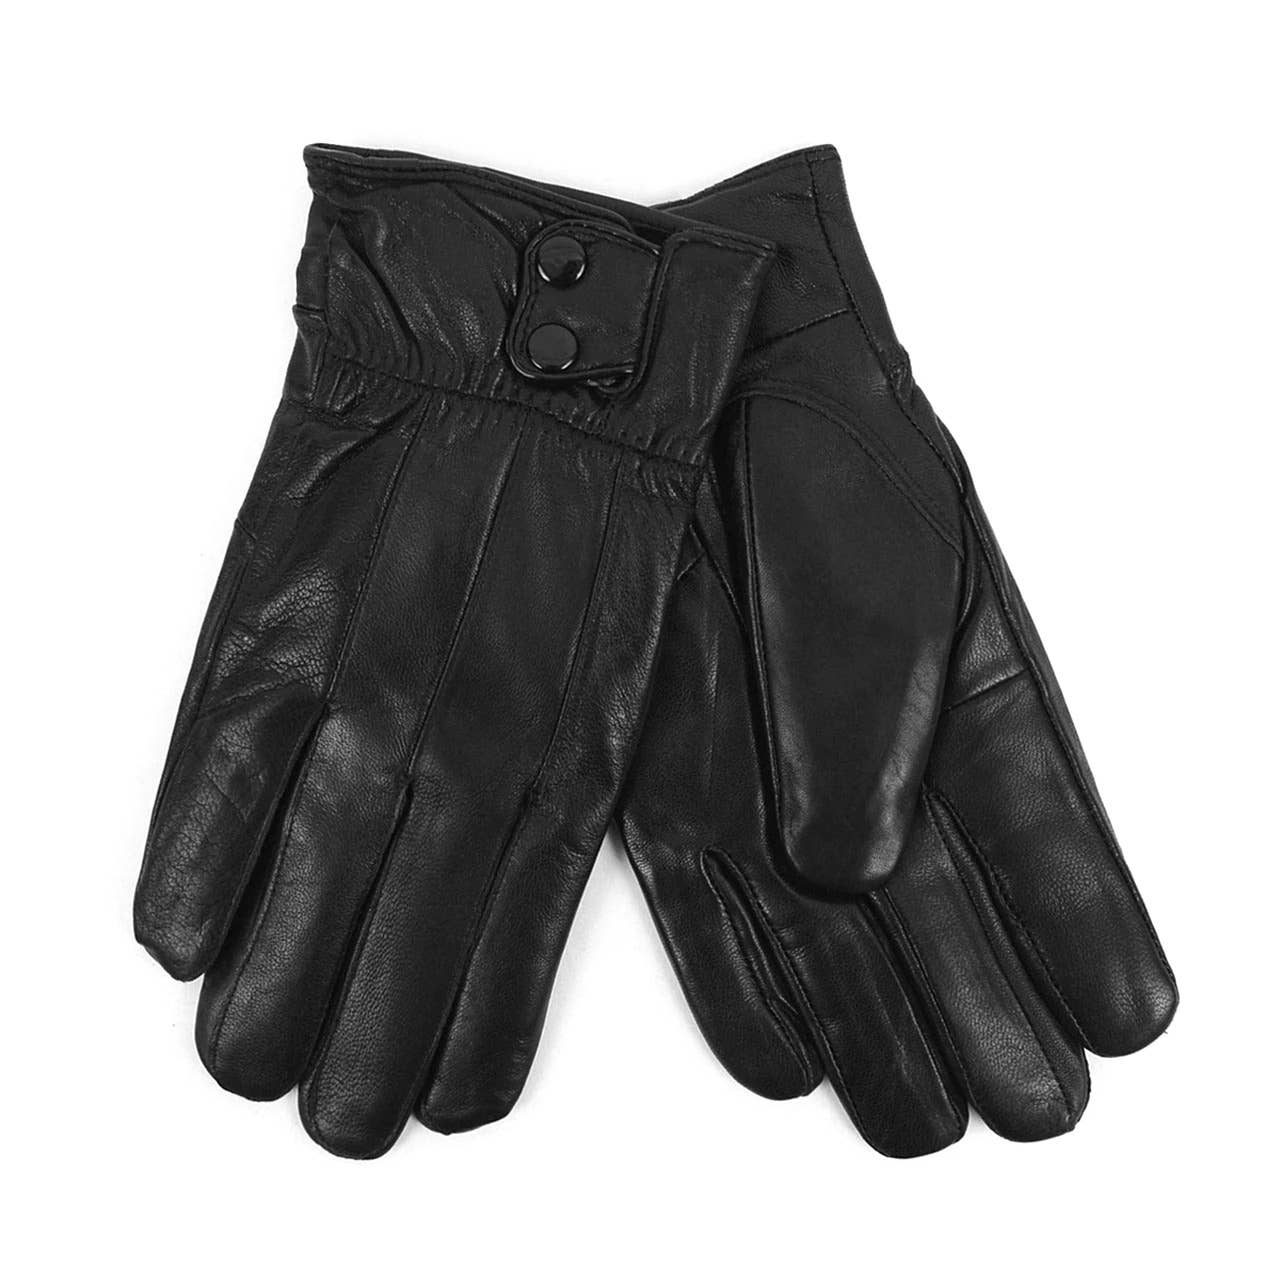 Men's Genuine Leather Winter Gloves with Soft Acrylic Lining: S/M